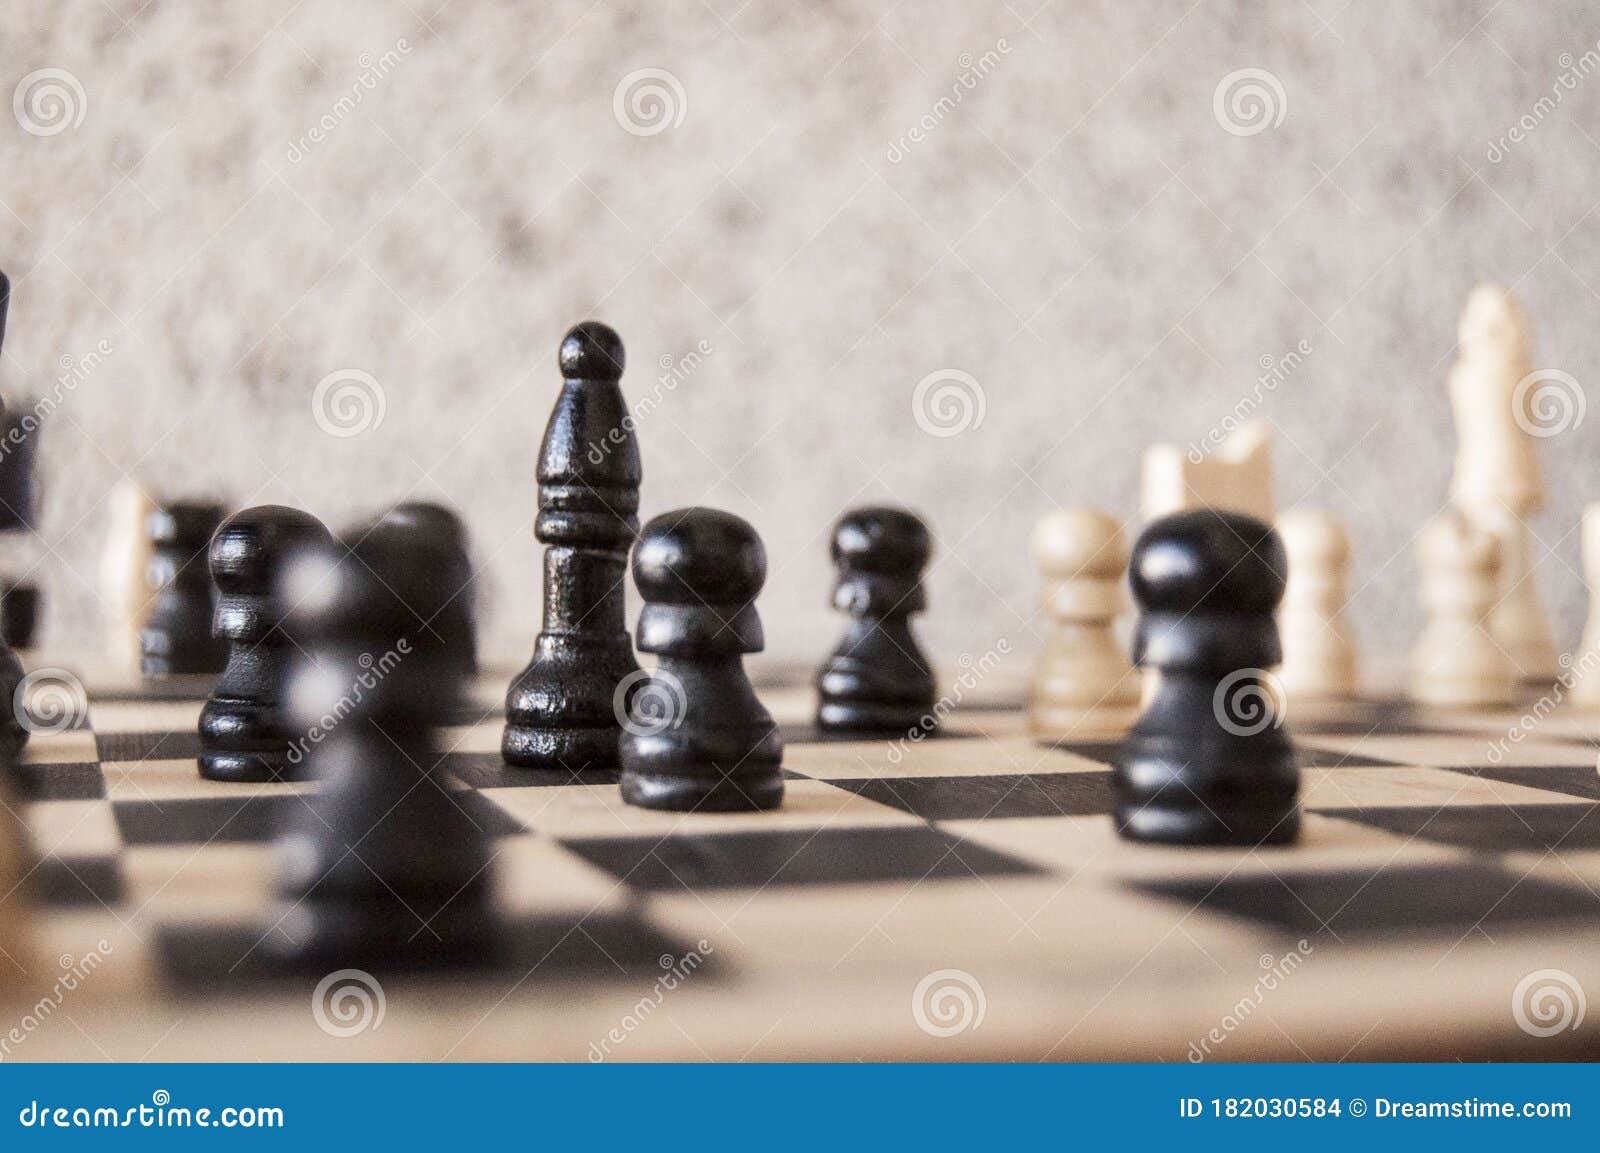 pieces on a chess board